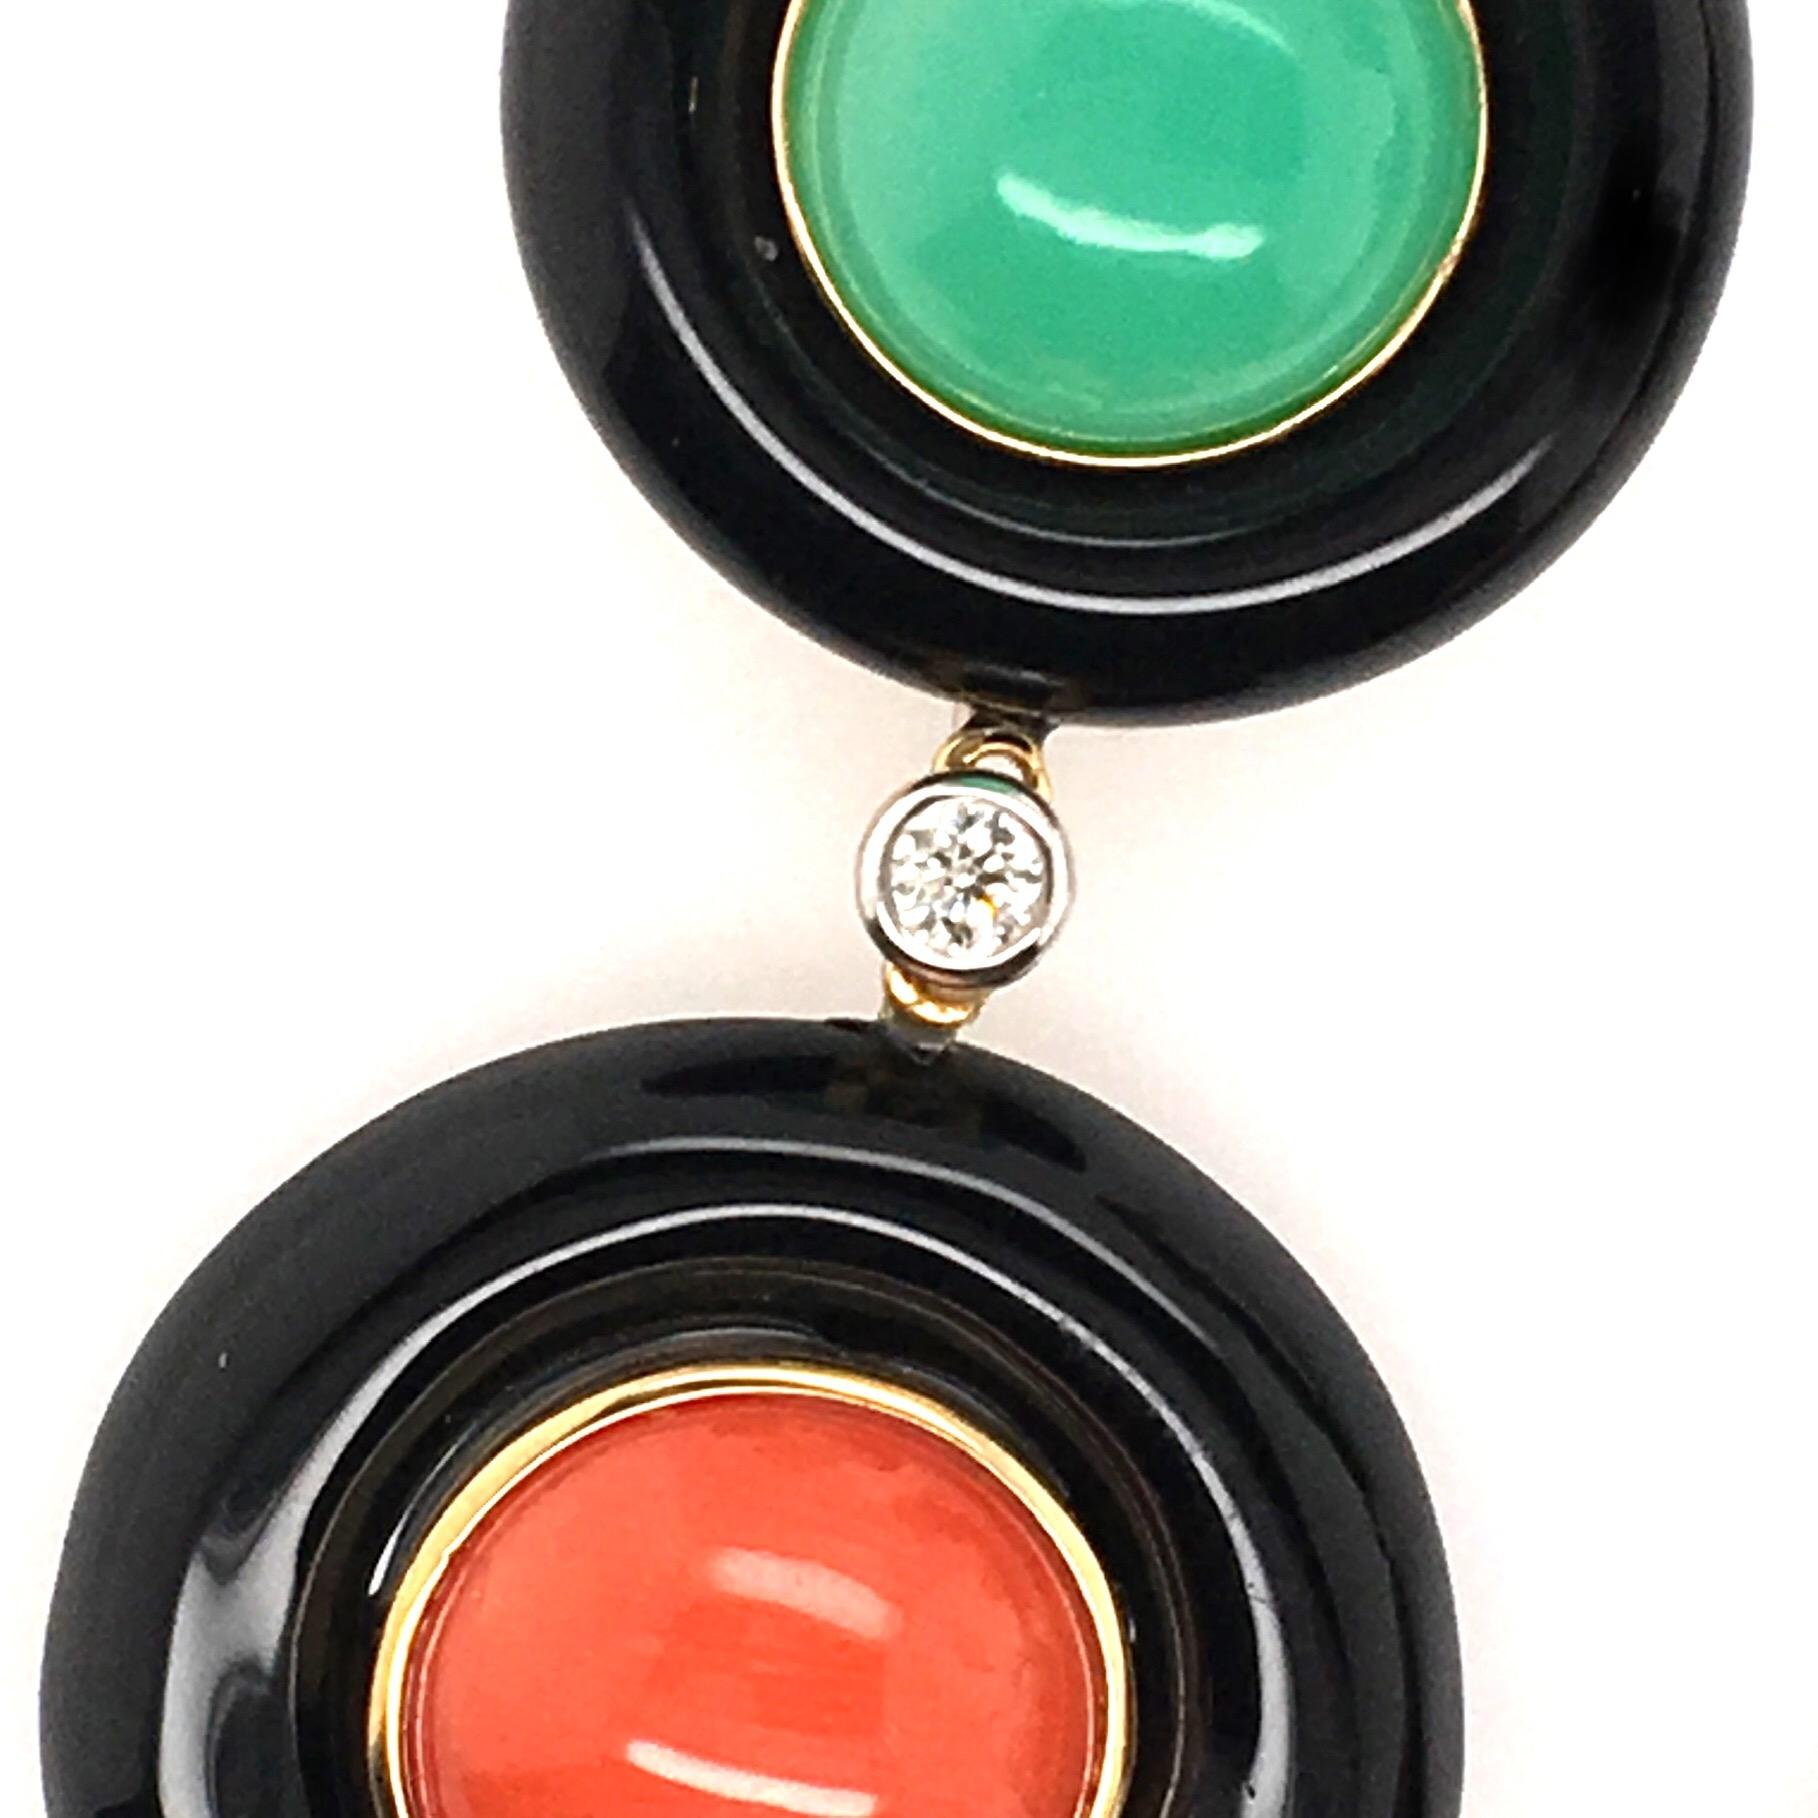 A pair of 18 karat yellow gold, black onyx, turquoise, chrysoprase, coral and diamond earrings with collapsible post and omega back.  The earring is composed of bezel-set colored stone cabochons set into three graduated black onyx circular frames. 